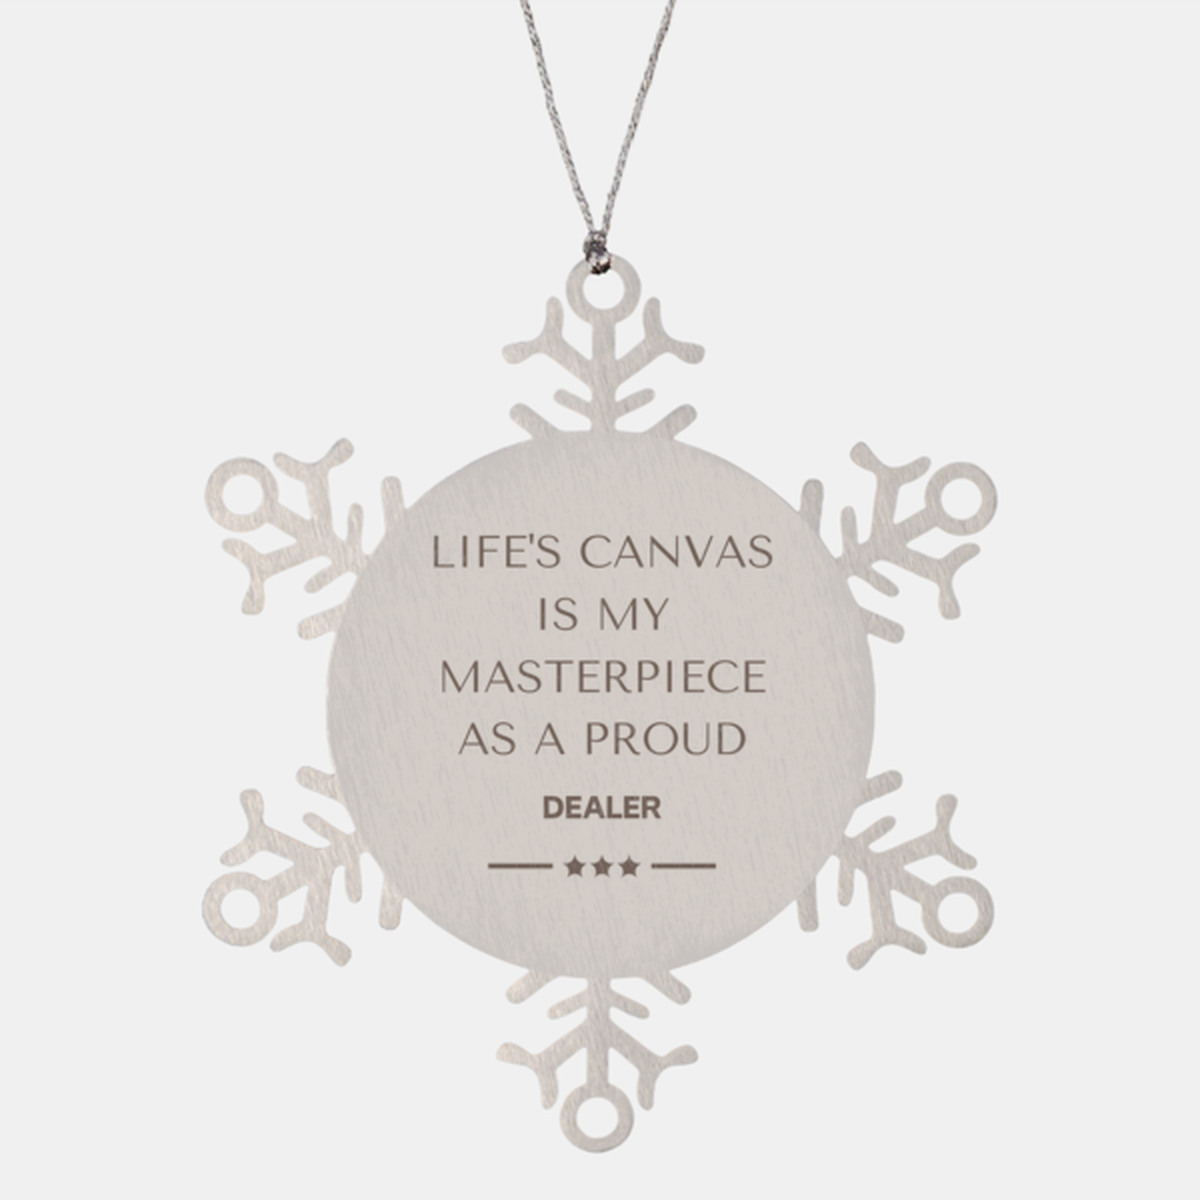 Proud Dealer Gifts, Life's canvas is my masterpiece, Epic Birthday Christmas Unique Snowflake Ornament For Dealer, Coworkers, Men, Women, Friends